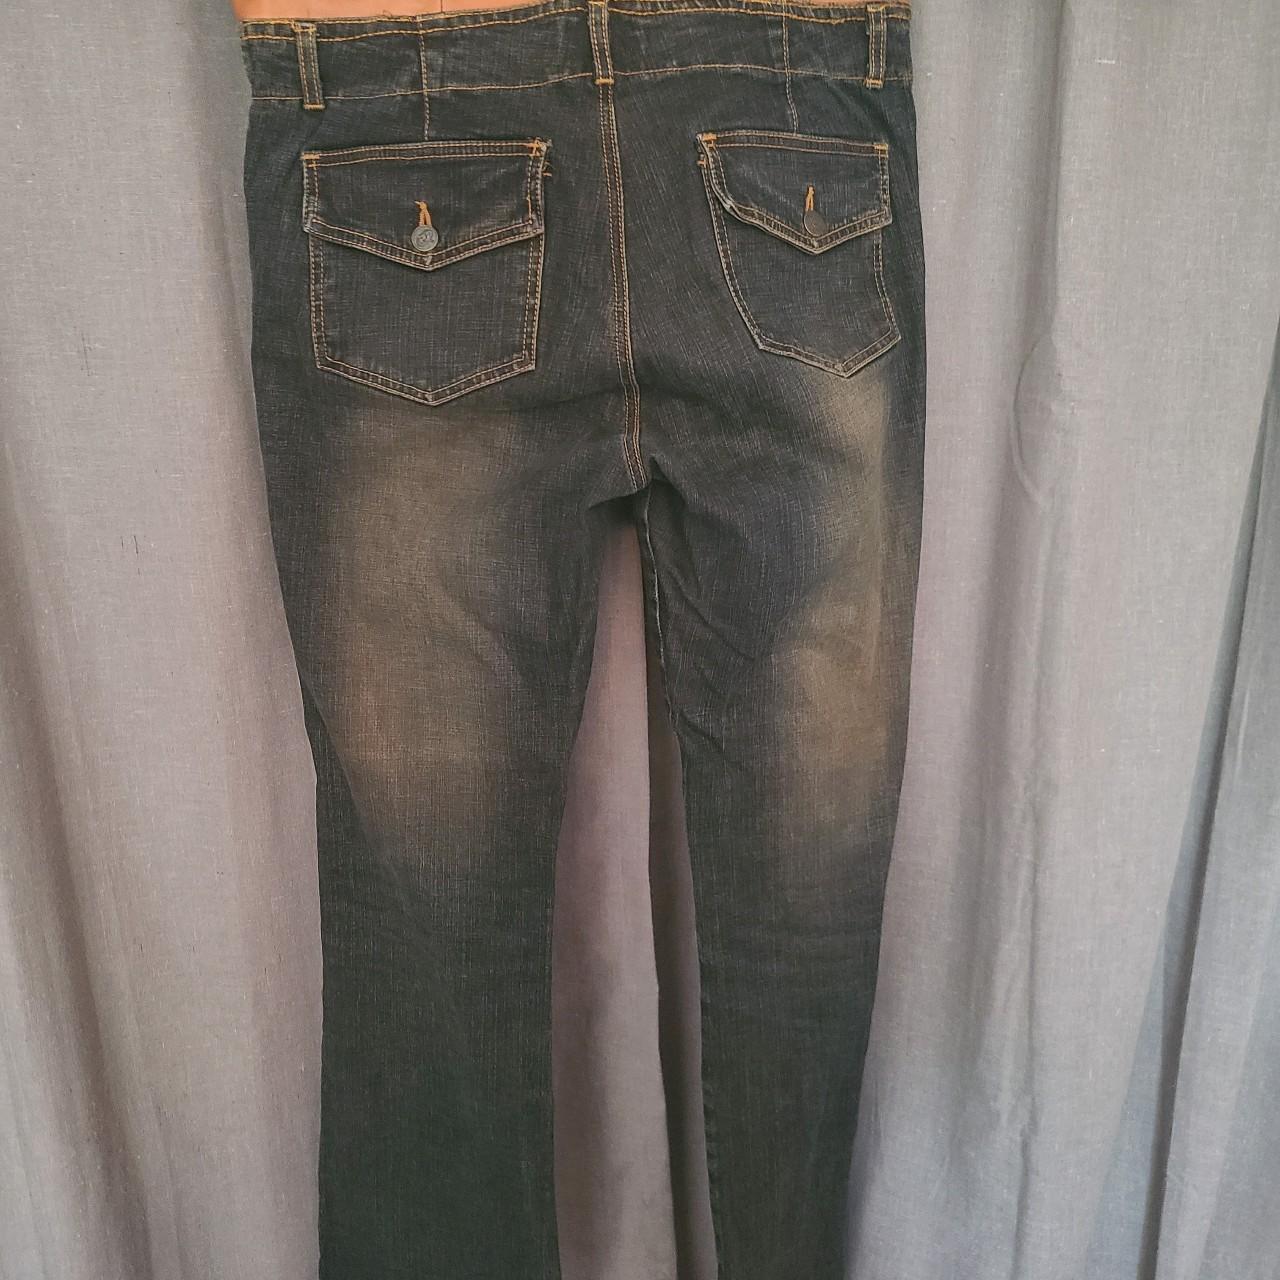 Vintage Parker jeans with faux leather waistband and... - Depop